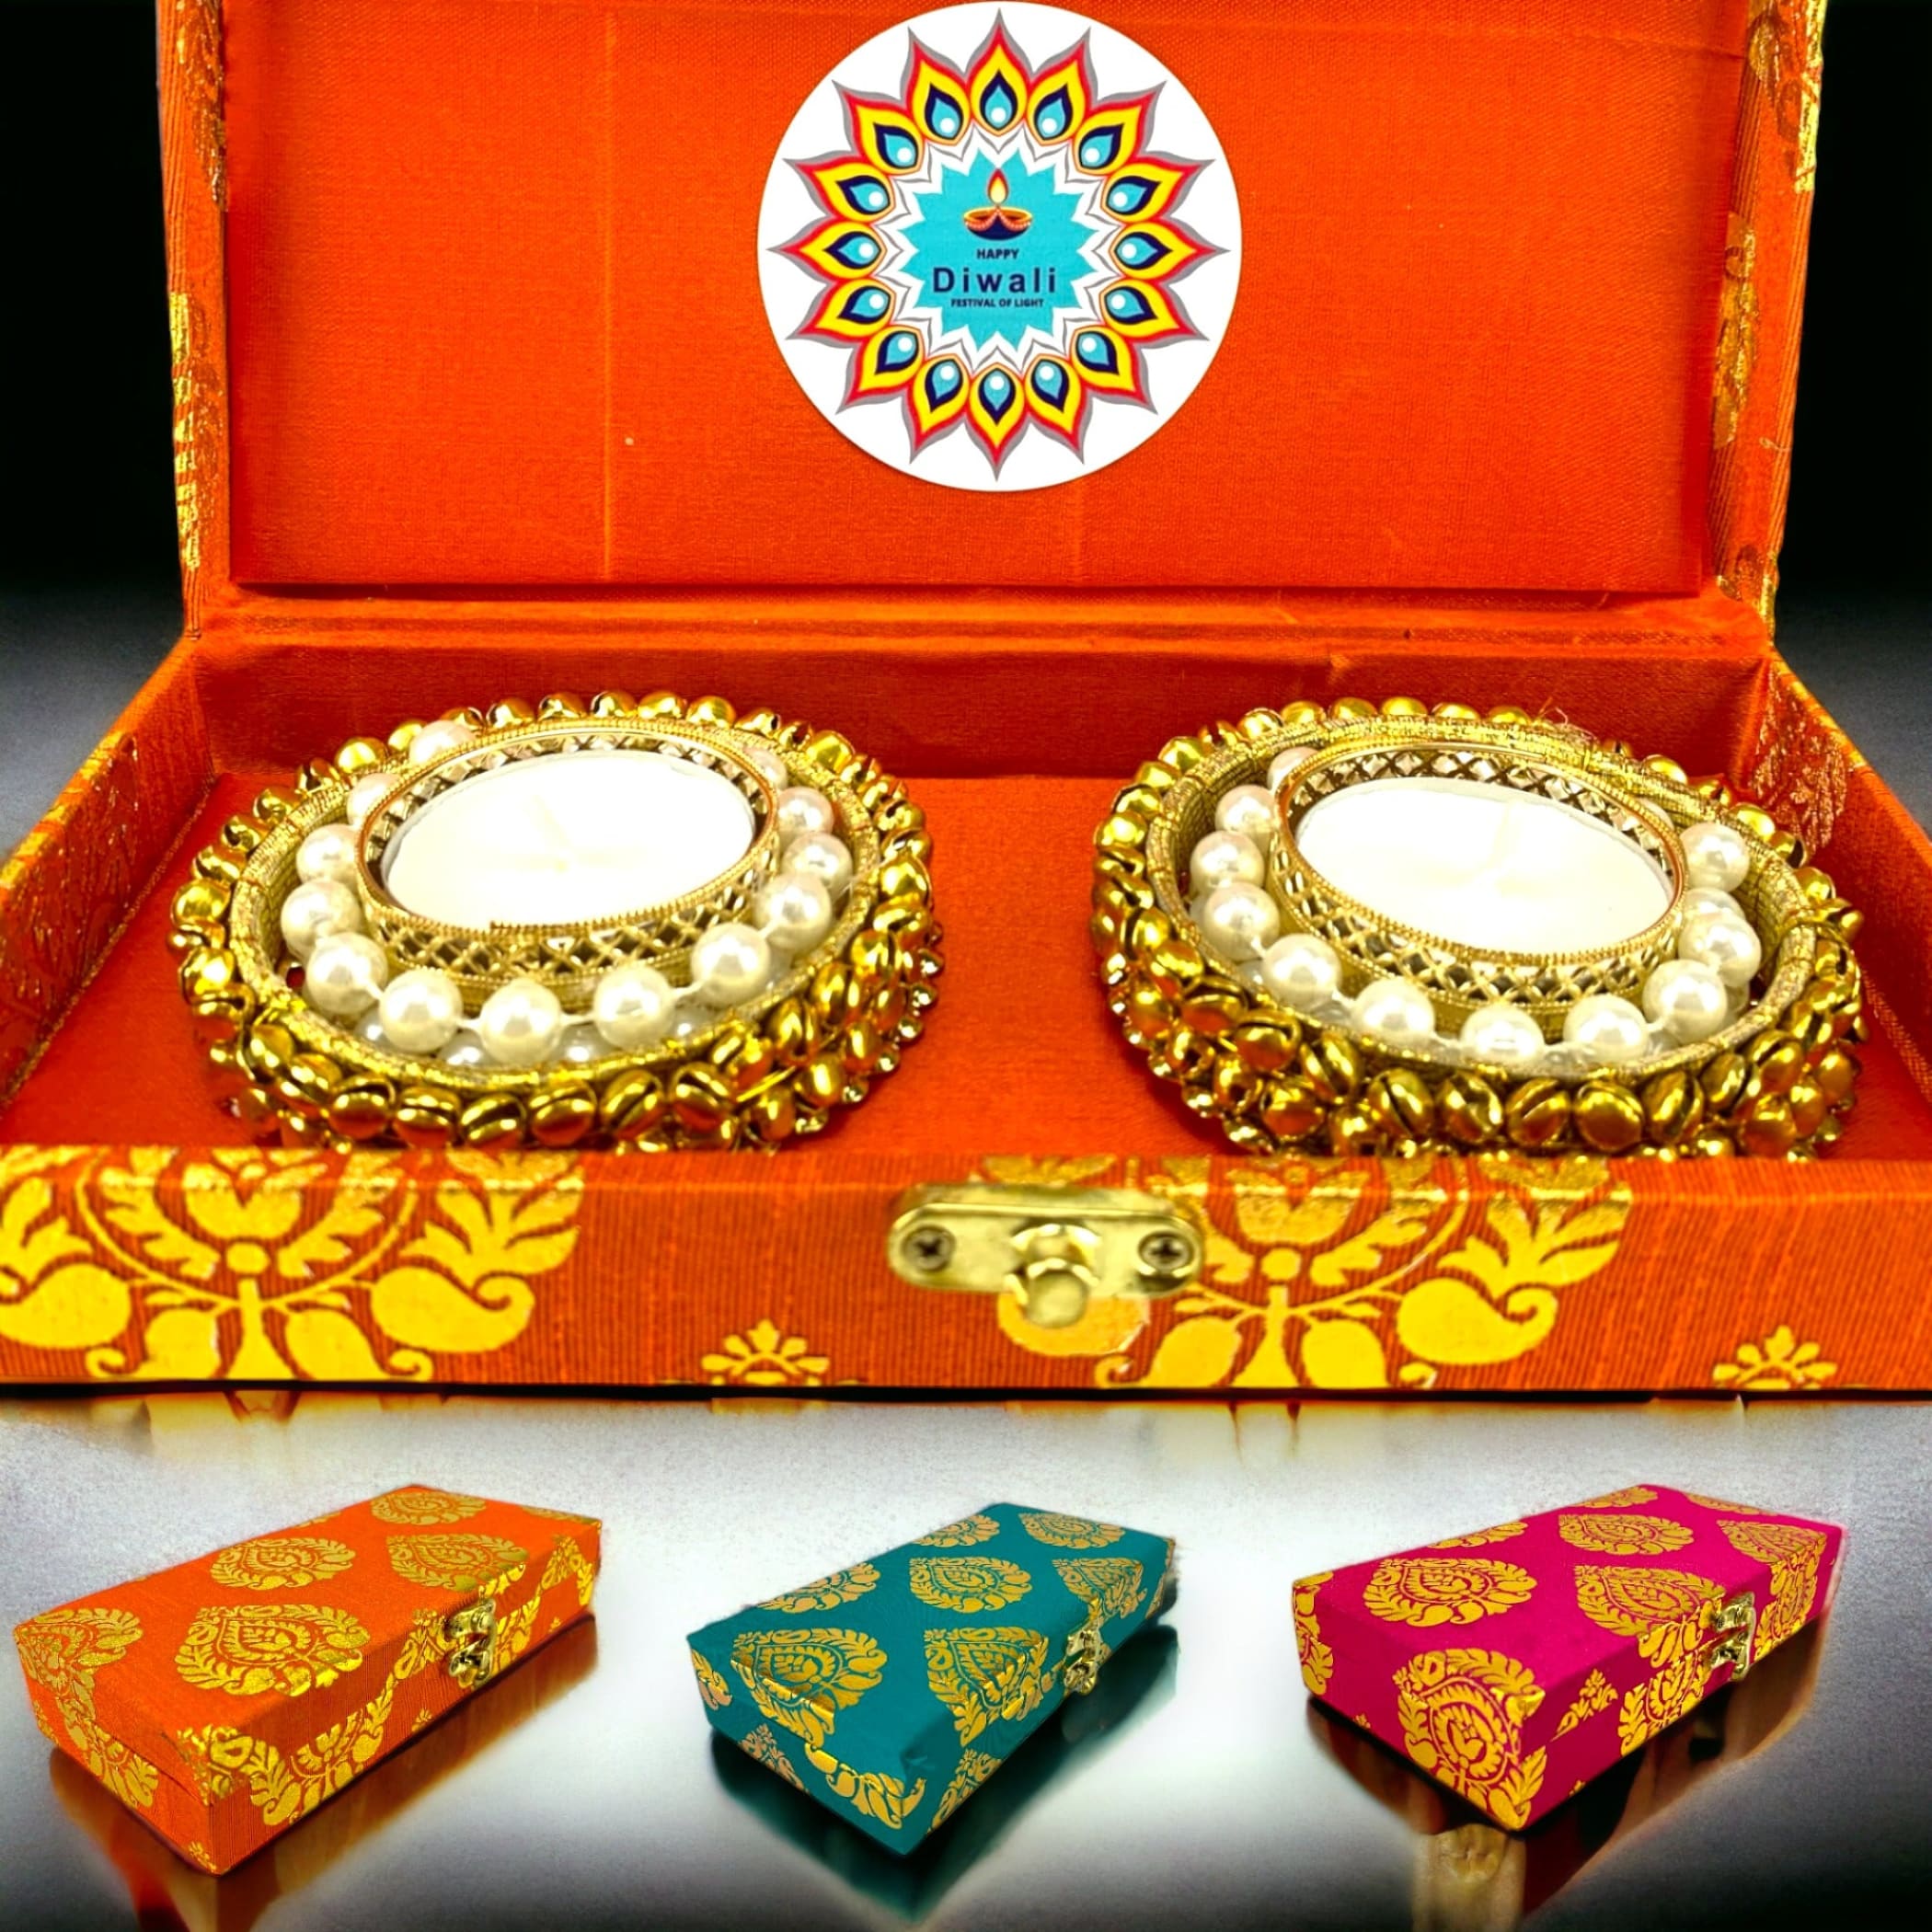 Candle Holder Personalize Diwali Gifts Boxes Navratri Gift